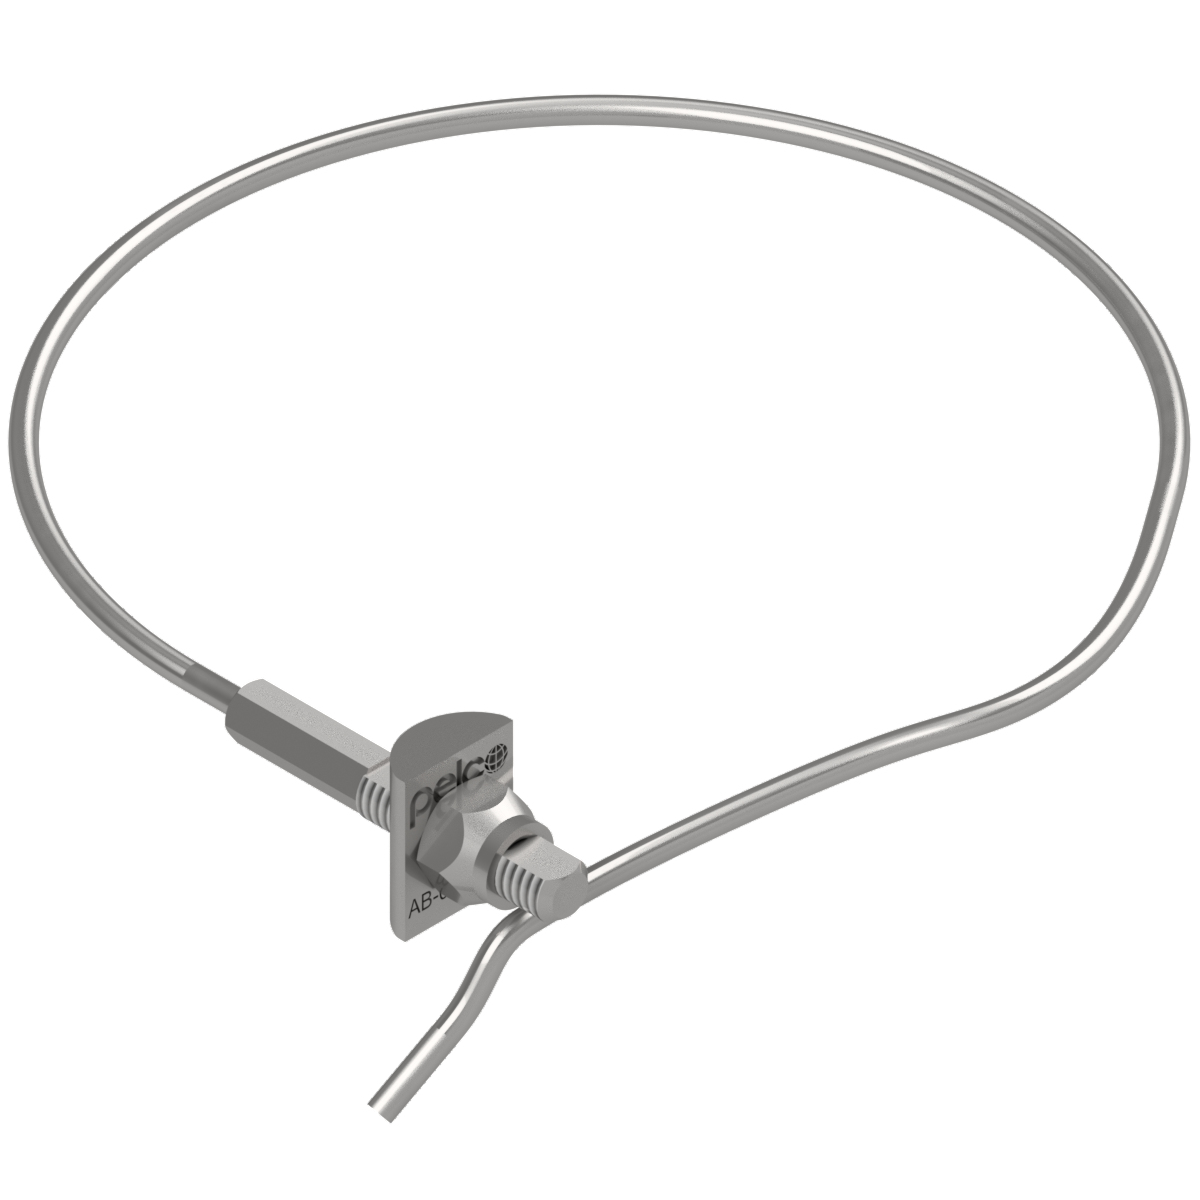 AB-0513 Cable Assy, Mini-Brac, Stainless